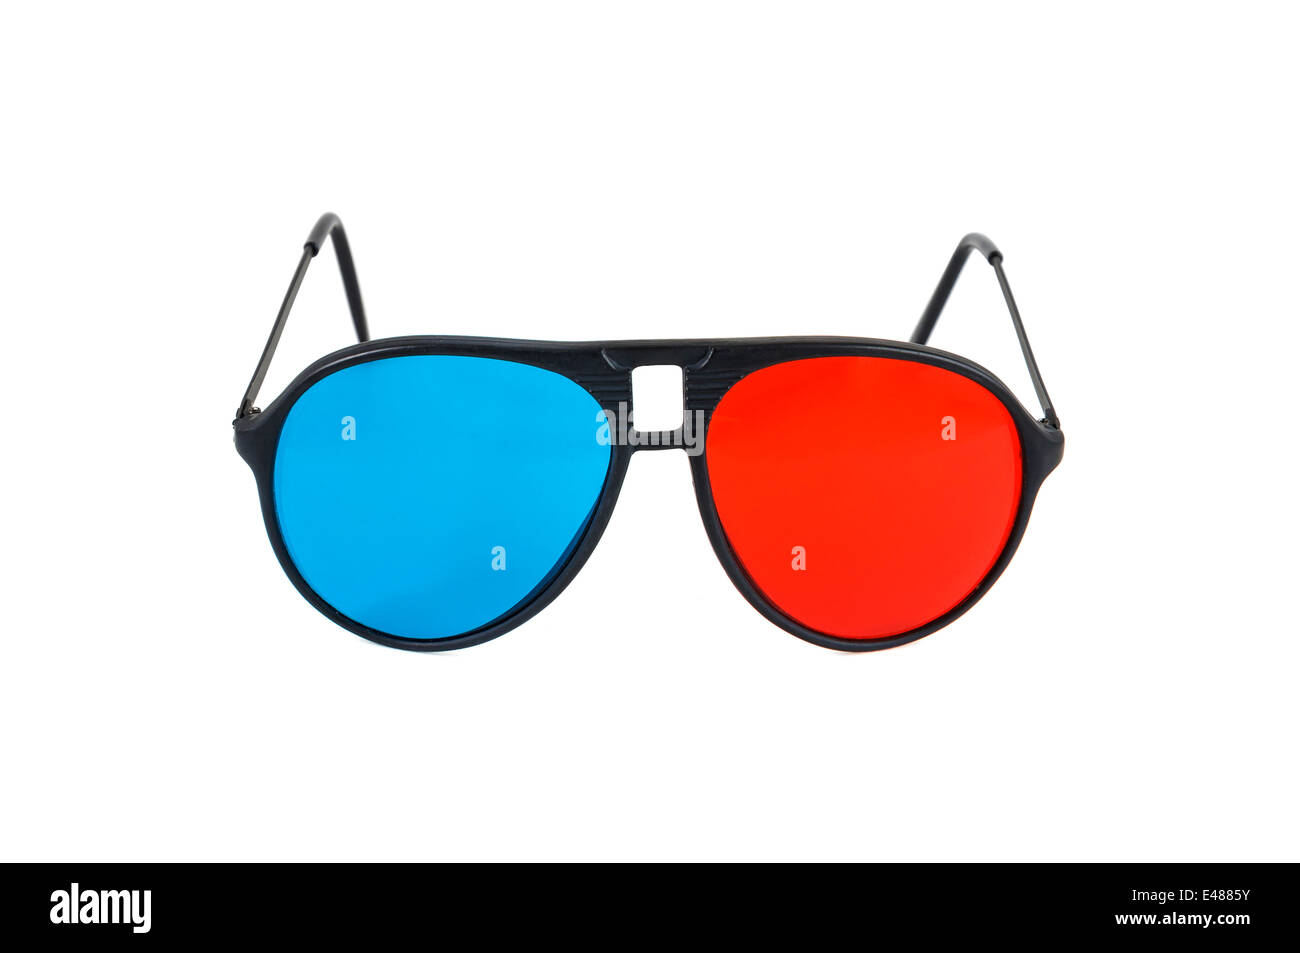 Red and Blue 3D glasses isolated on white background with clipping path Stock Photo